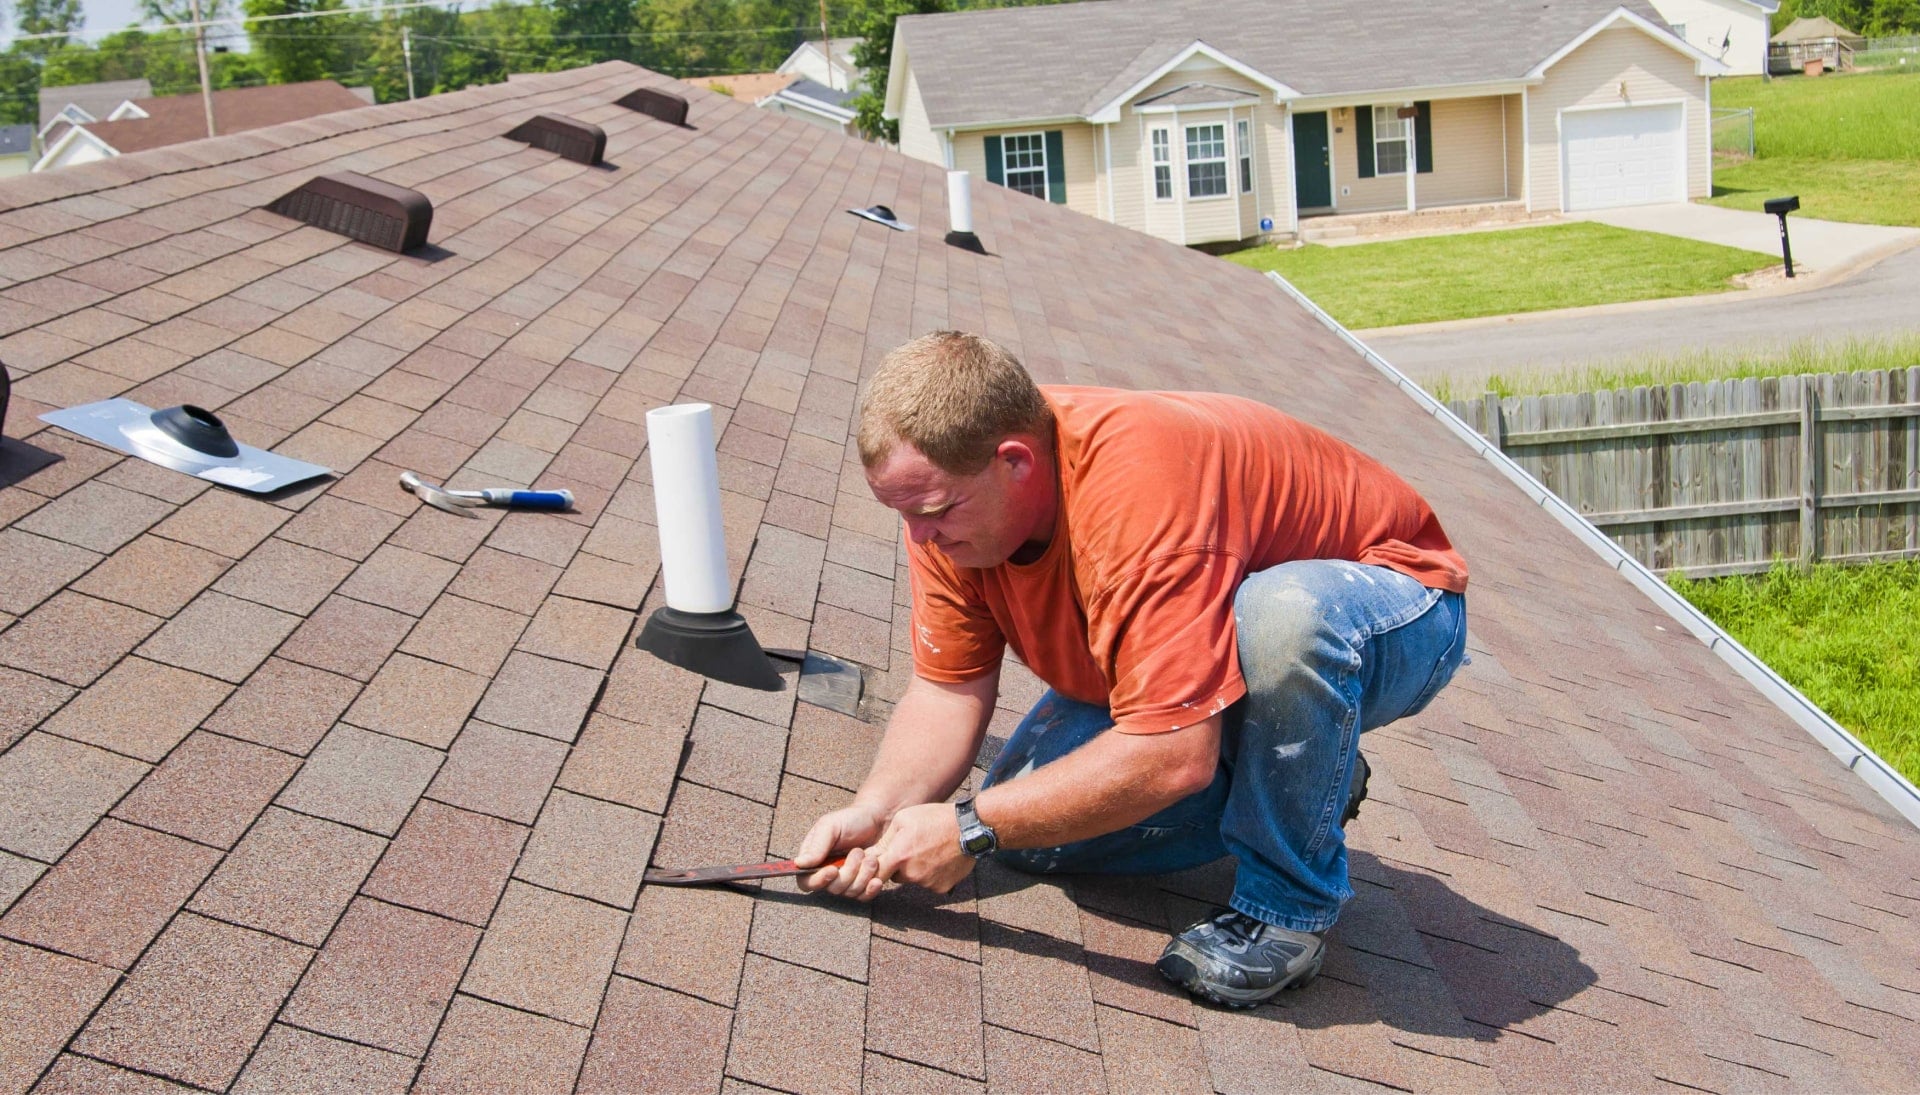 Dependable Roof and shingle repair experts in San Diego, California committed to customer satisfaction.